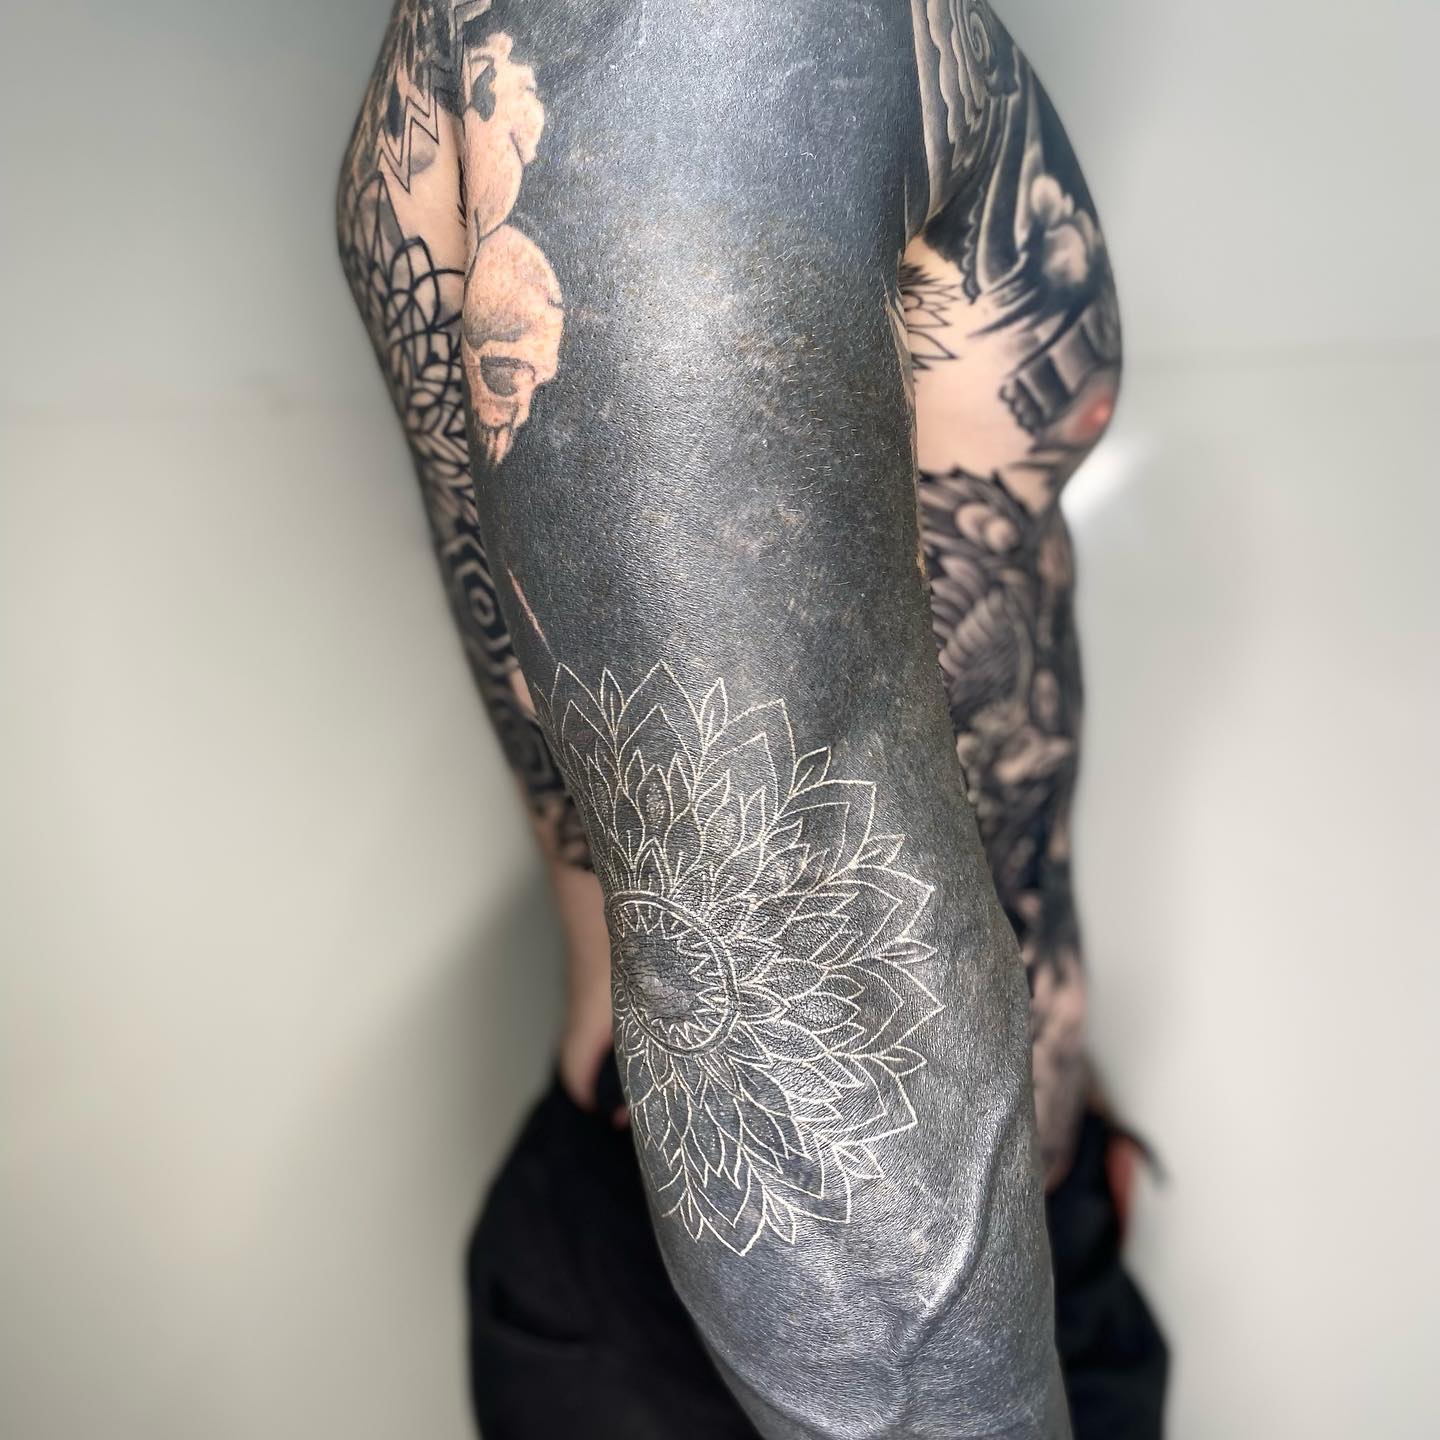 This type of giant elbow tattoo with black lines and faded artwork will look great on those who wish to stand out. As they fade these tattoos tend to look even better, so you’ll be in luck.